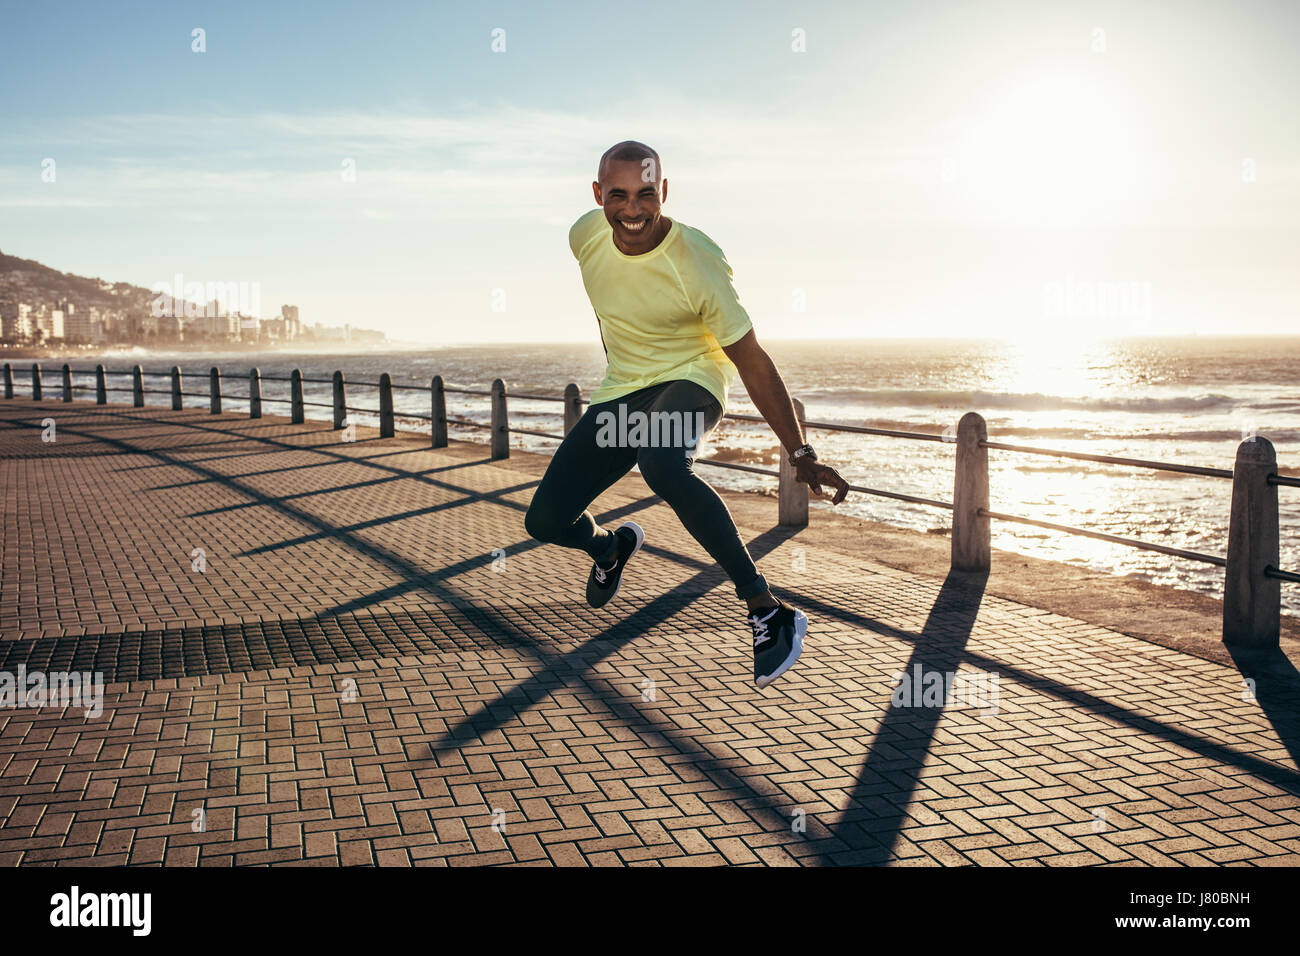 Young african man jumping on a road by the sea. Excited young runner jumping. Stock Photo